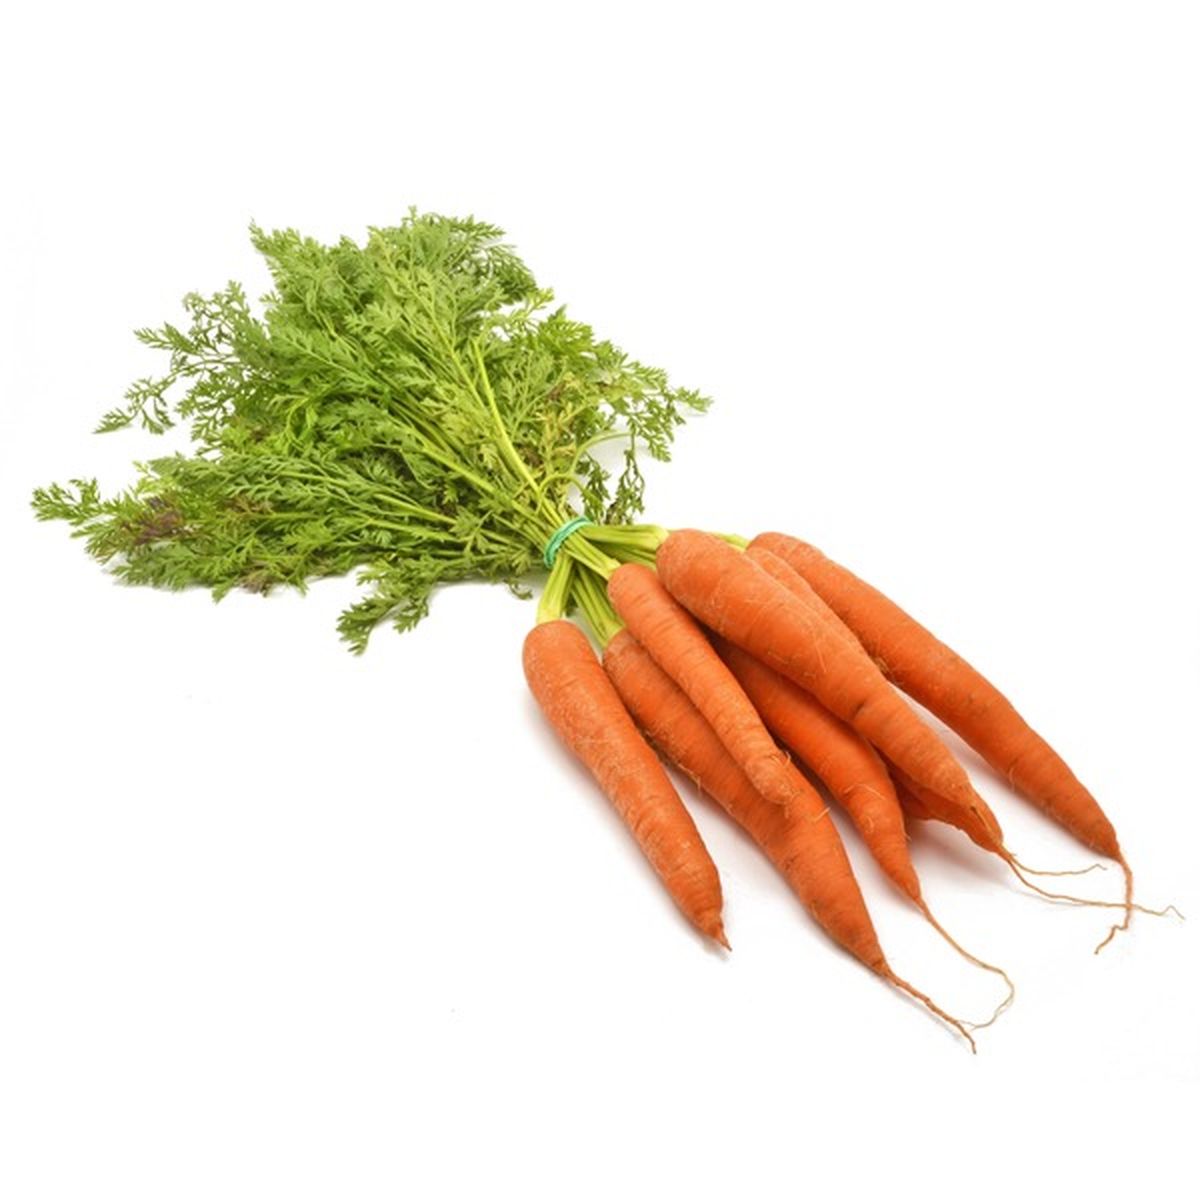 Blanched carrots